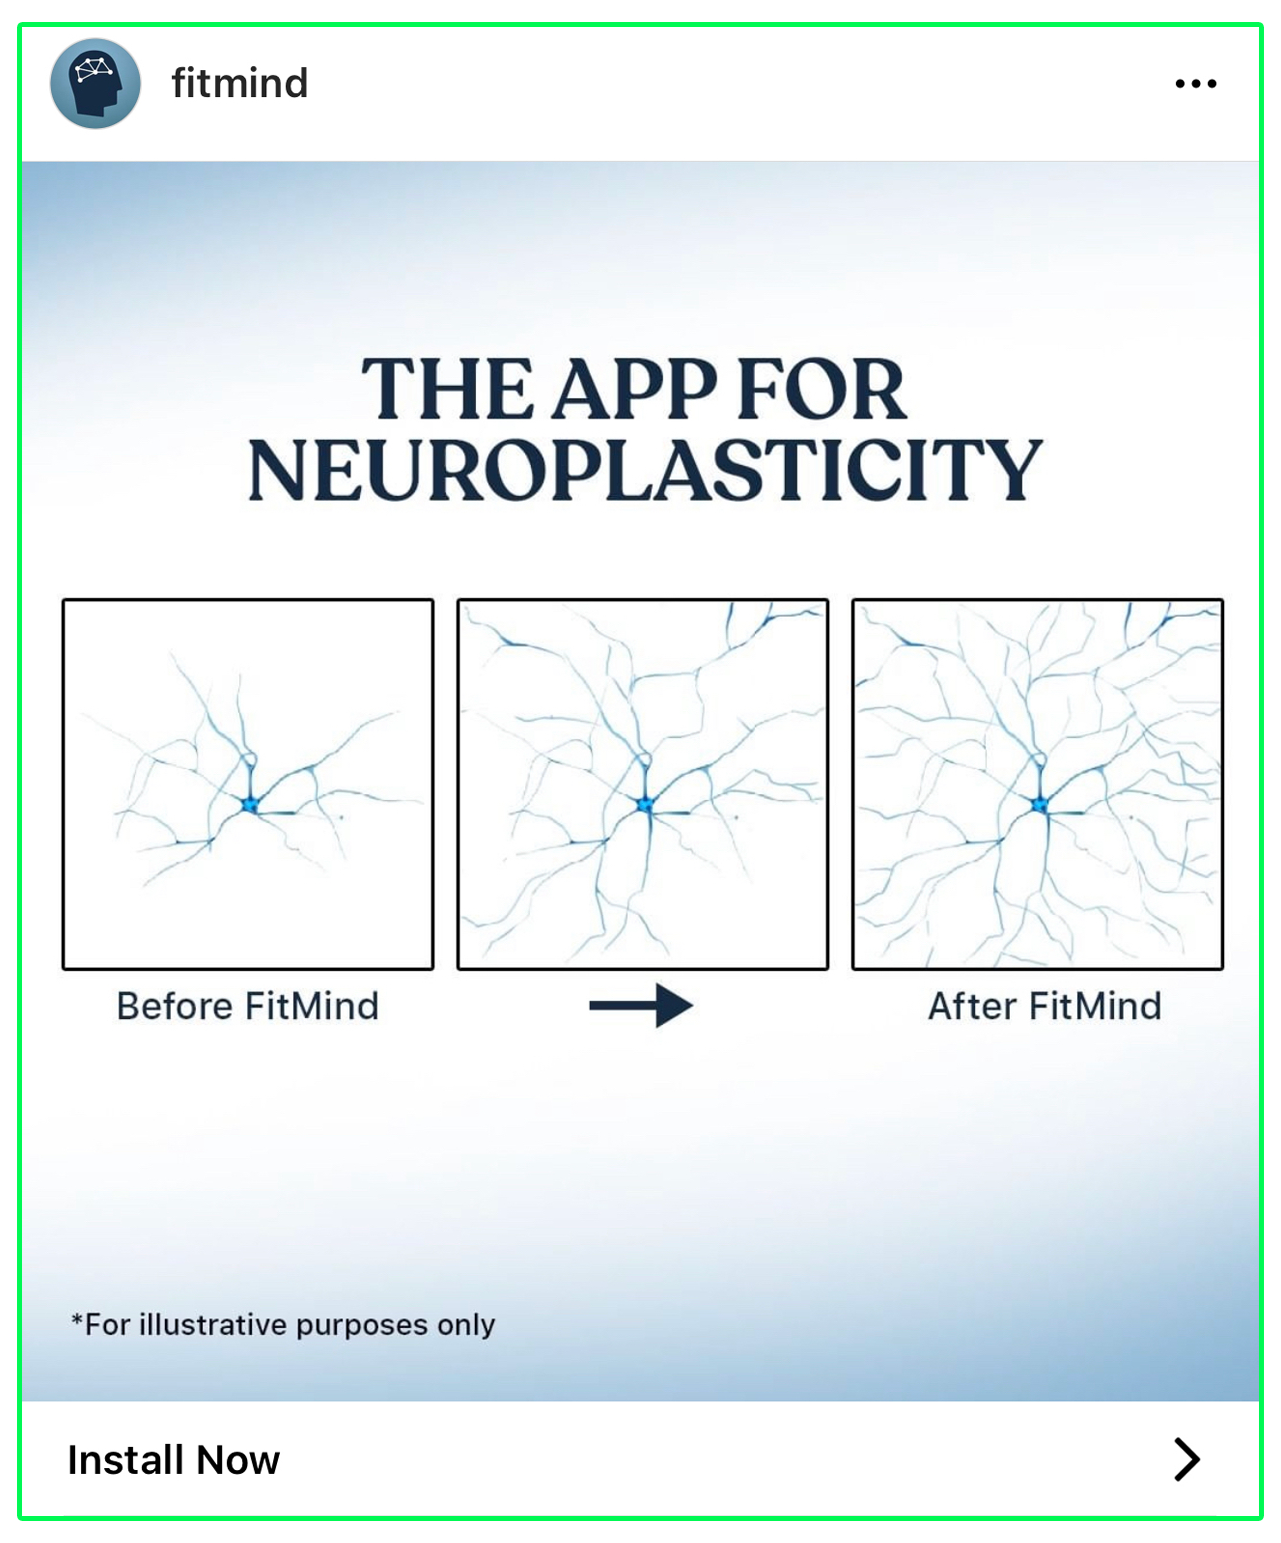 A virtually identical ad to the one by Bloom, except this one is from a company called FitMind, and says “the app for neuroplasticity”. The three panel image also shows a neuron growing dendrites, but it is a different illustration, and the caption under the first panel says Before FitMind, with the caption under the third panel saying After FitMind. The fine print also says “for illustrative purposes only”